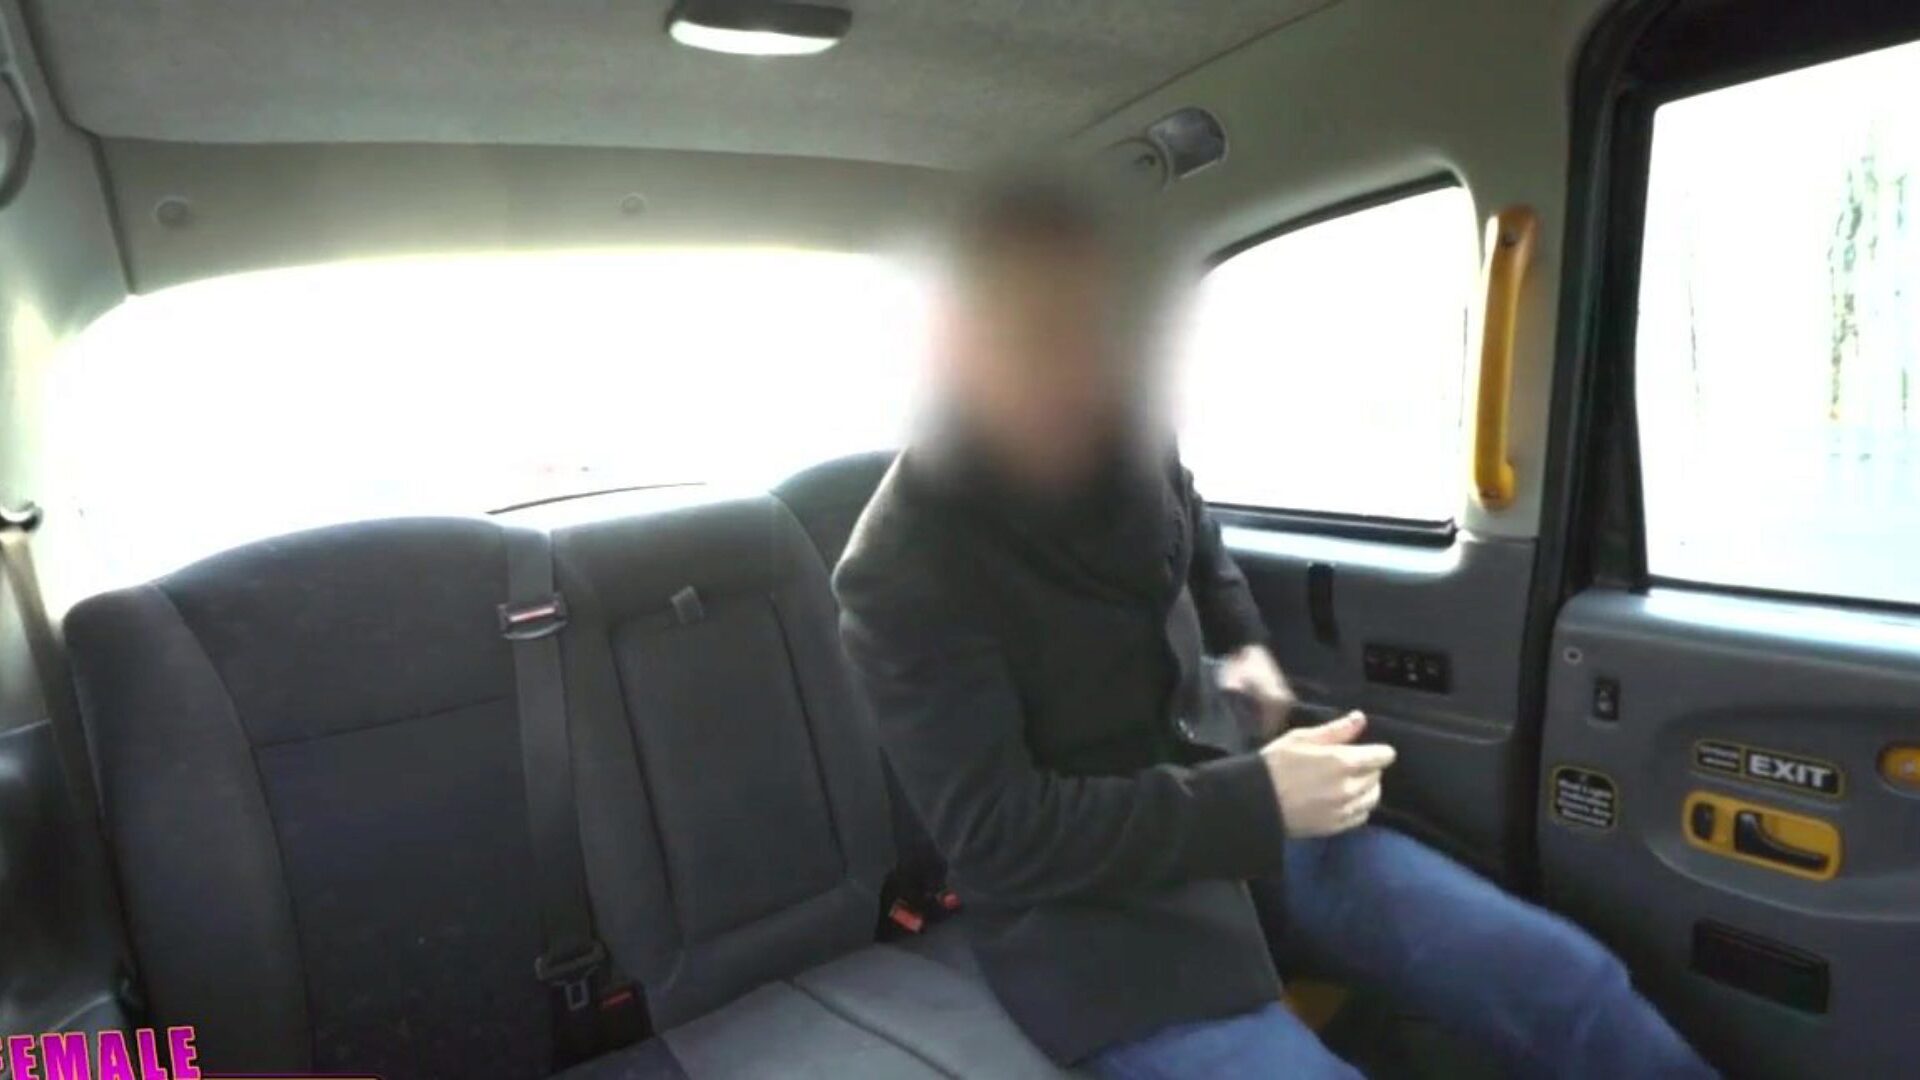 Female Fake Taxi Hot nymph cab driver drilled in her constricted butthole